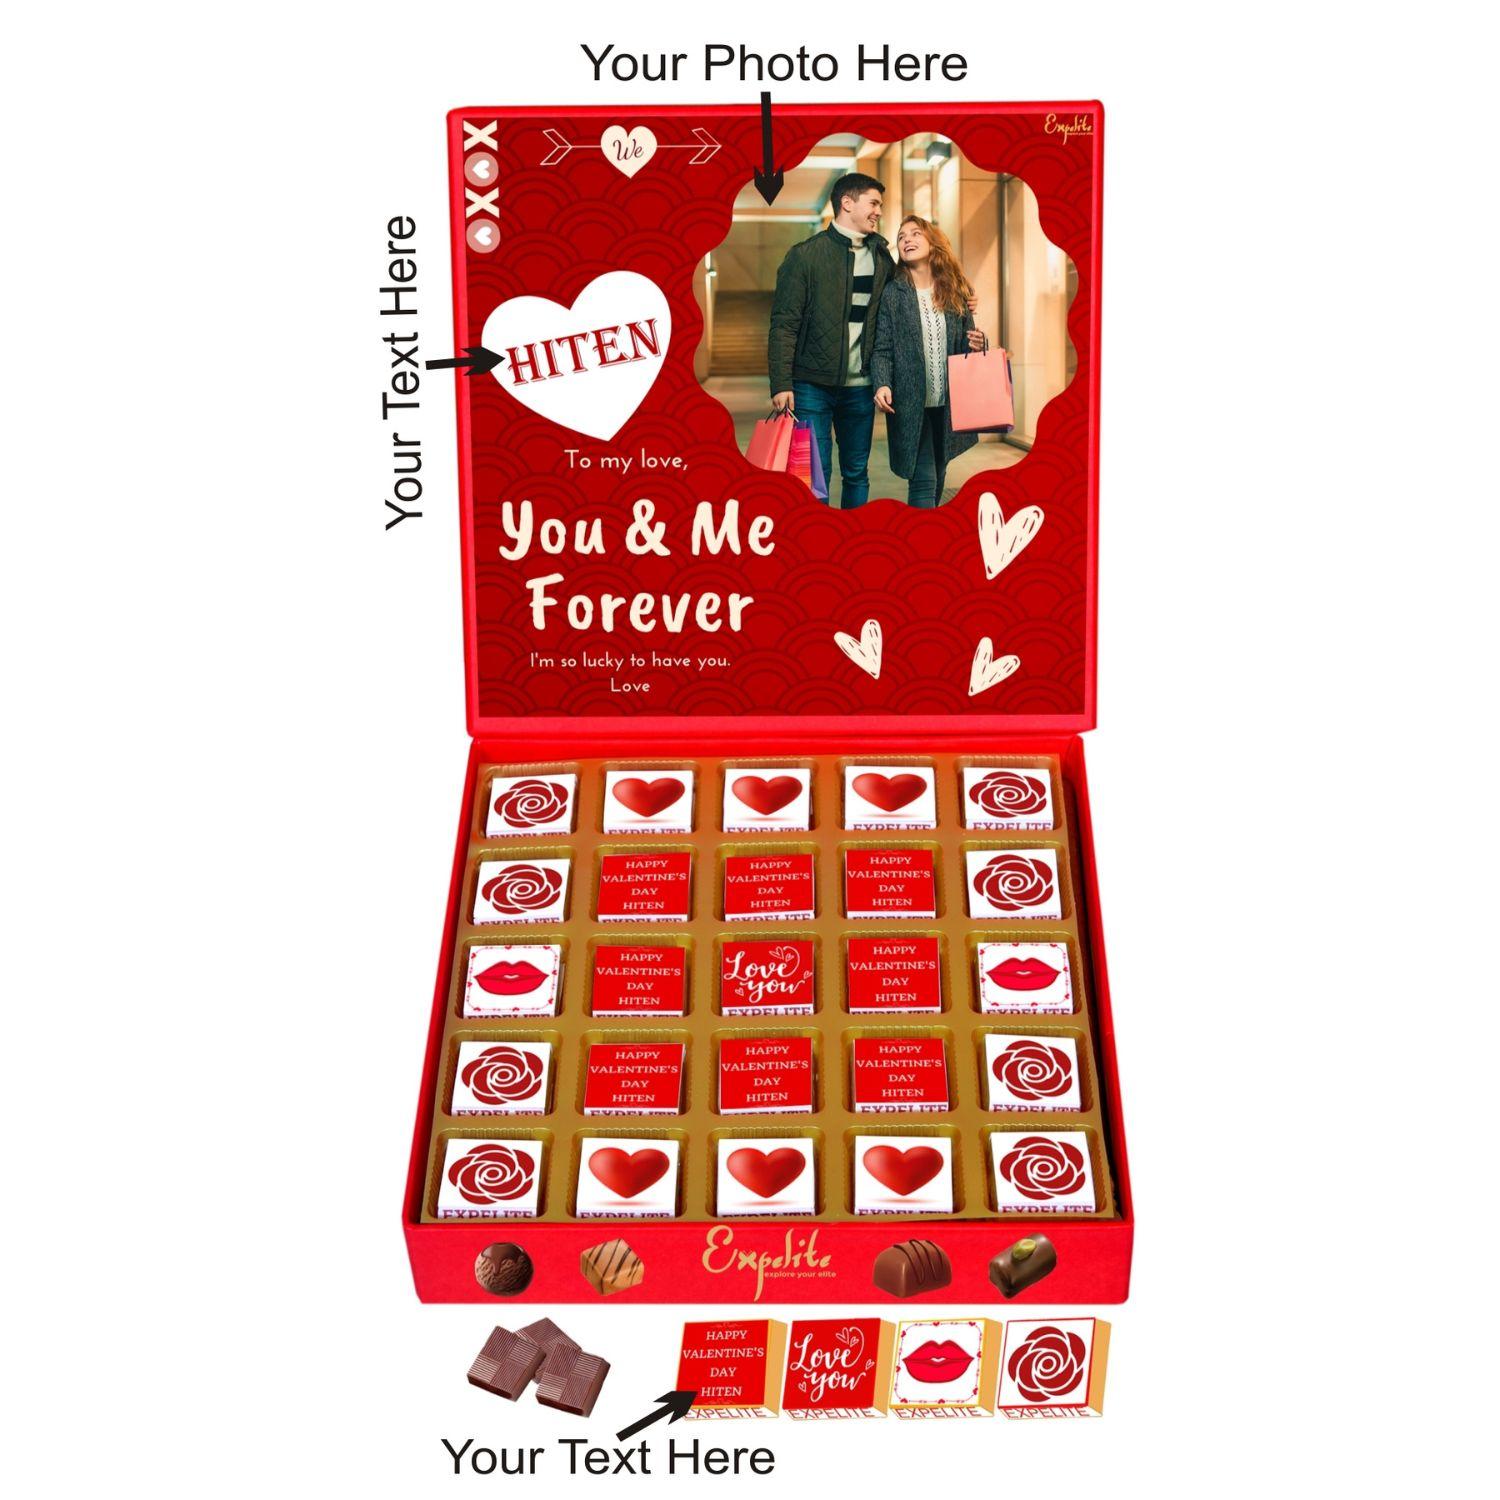 Personalized Birthday Chocolates Gift Pack with Names / Photo - 24 pieces  Customized Birthday Chocolate Gift box for Girls / Sister / Female friend /  Girlfriend / Wife / her : Amazon.in: Grocery & Gourmet Foods